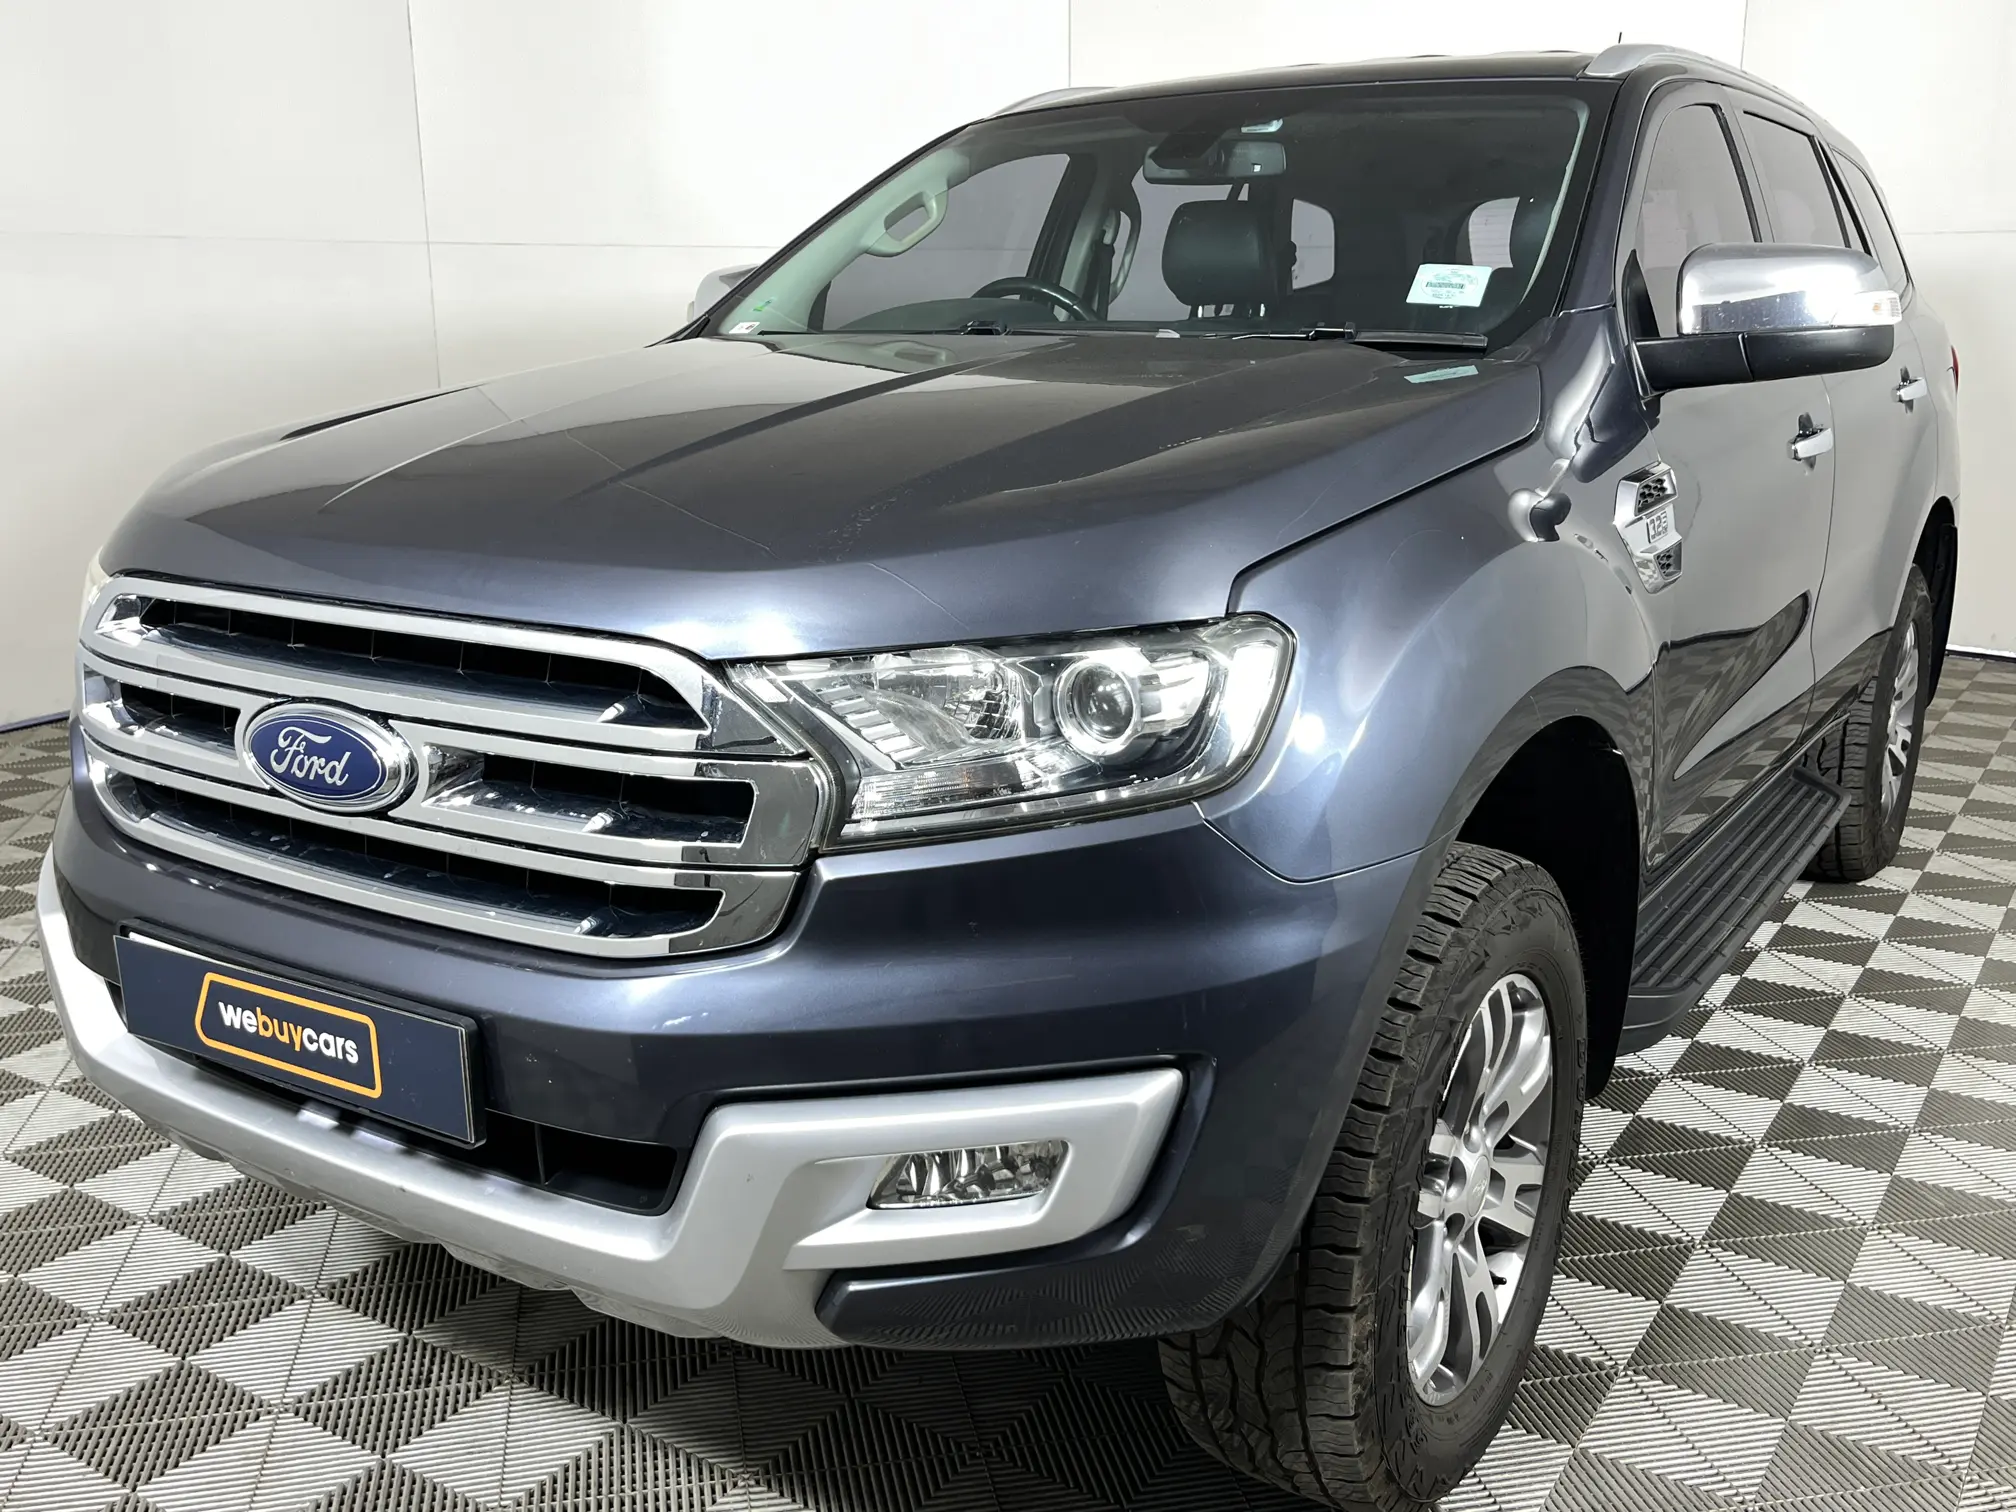 2017 Ford Everest 3.2 TDCi XLT Auto